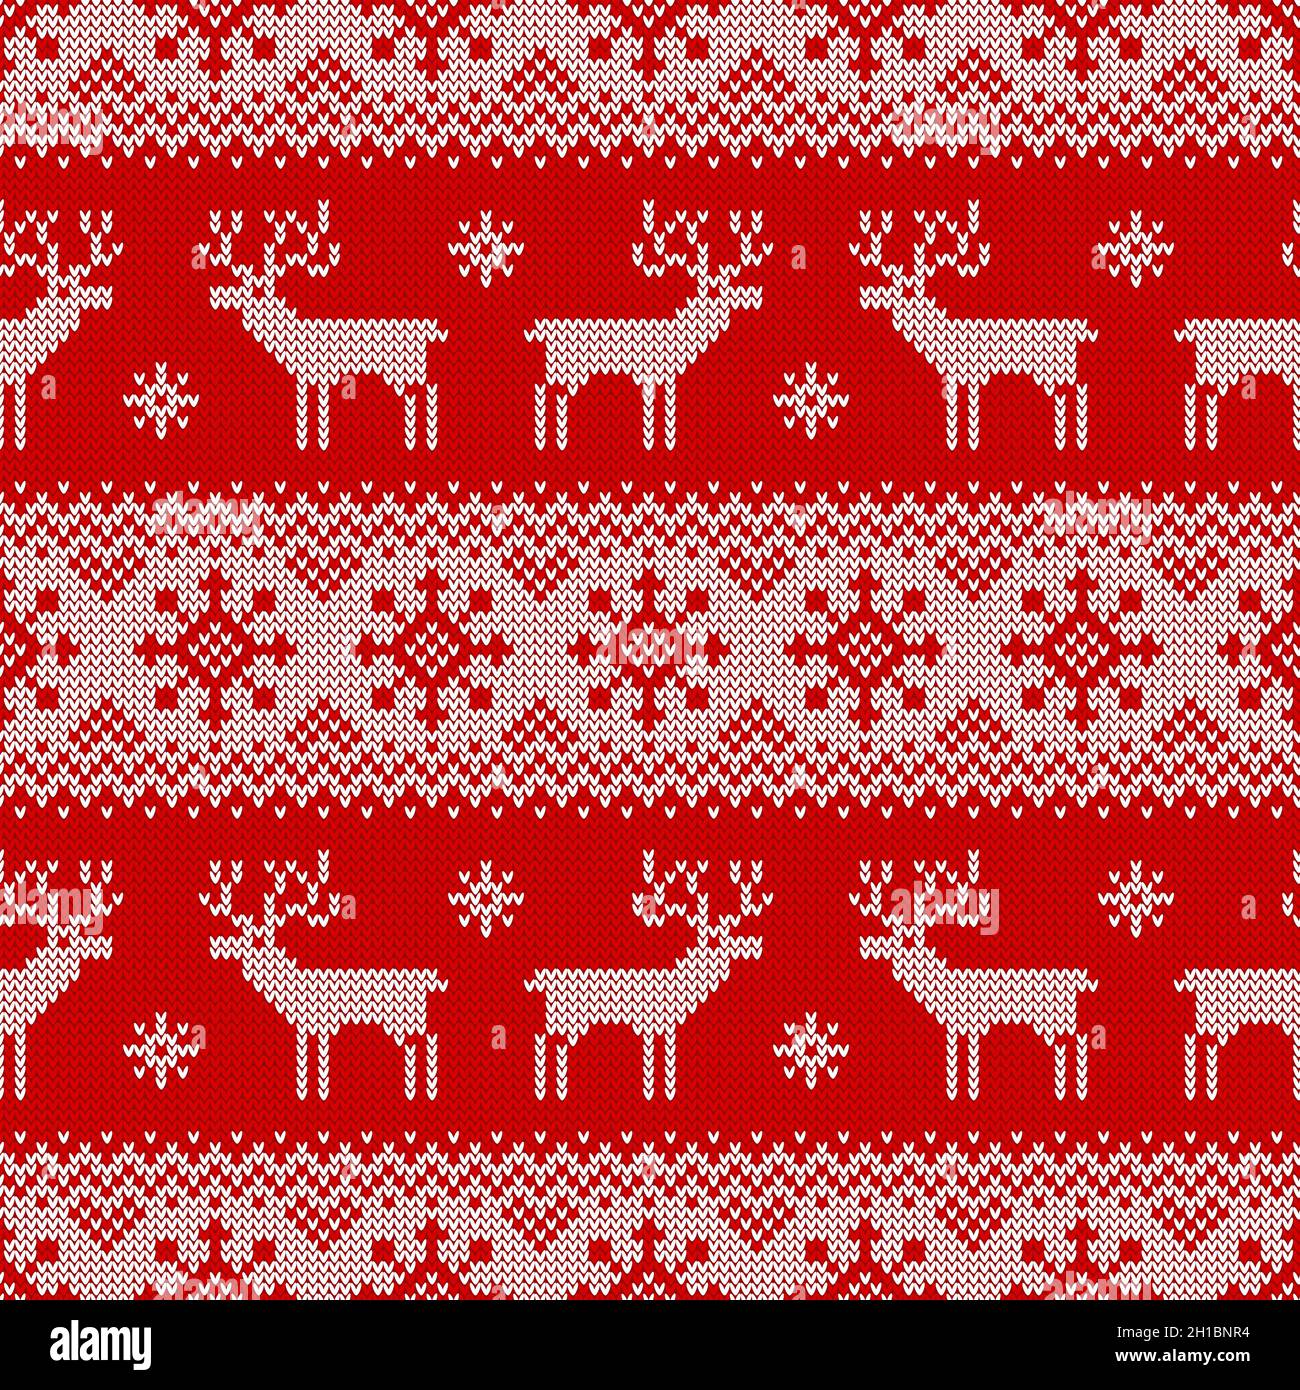 Knitted seamless pattern with deers, snowflakes, and scandinavian ornament. Red and white sweater background for Christmas, New Year or winter design. Stock Vector